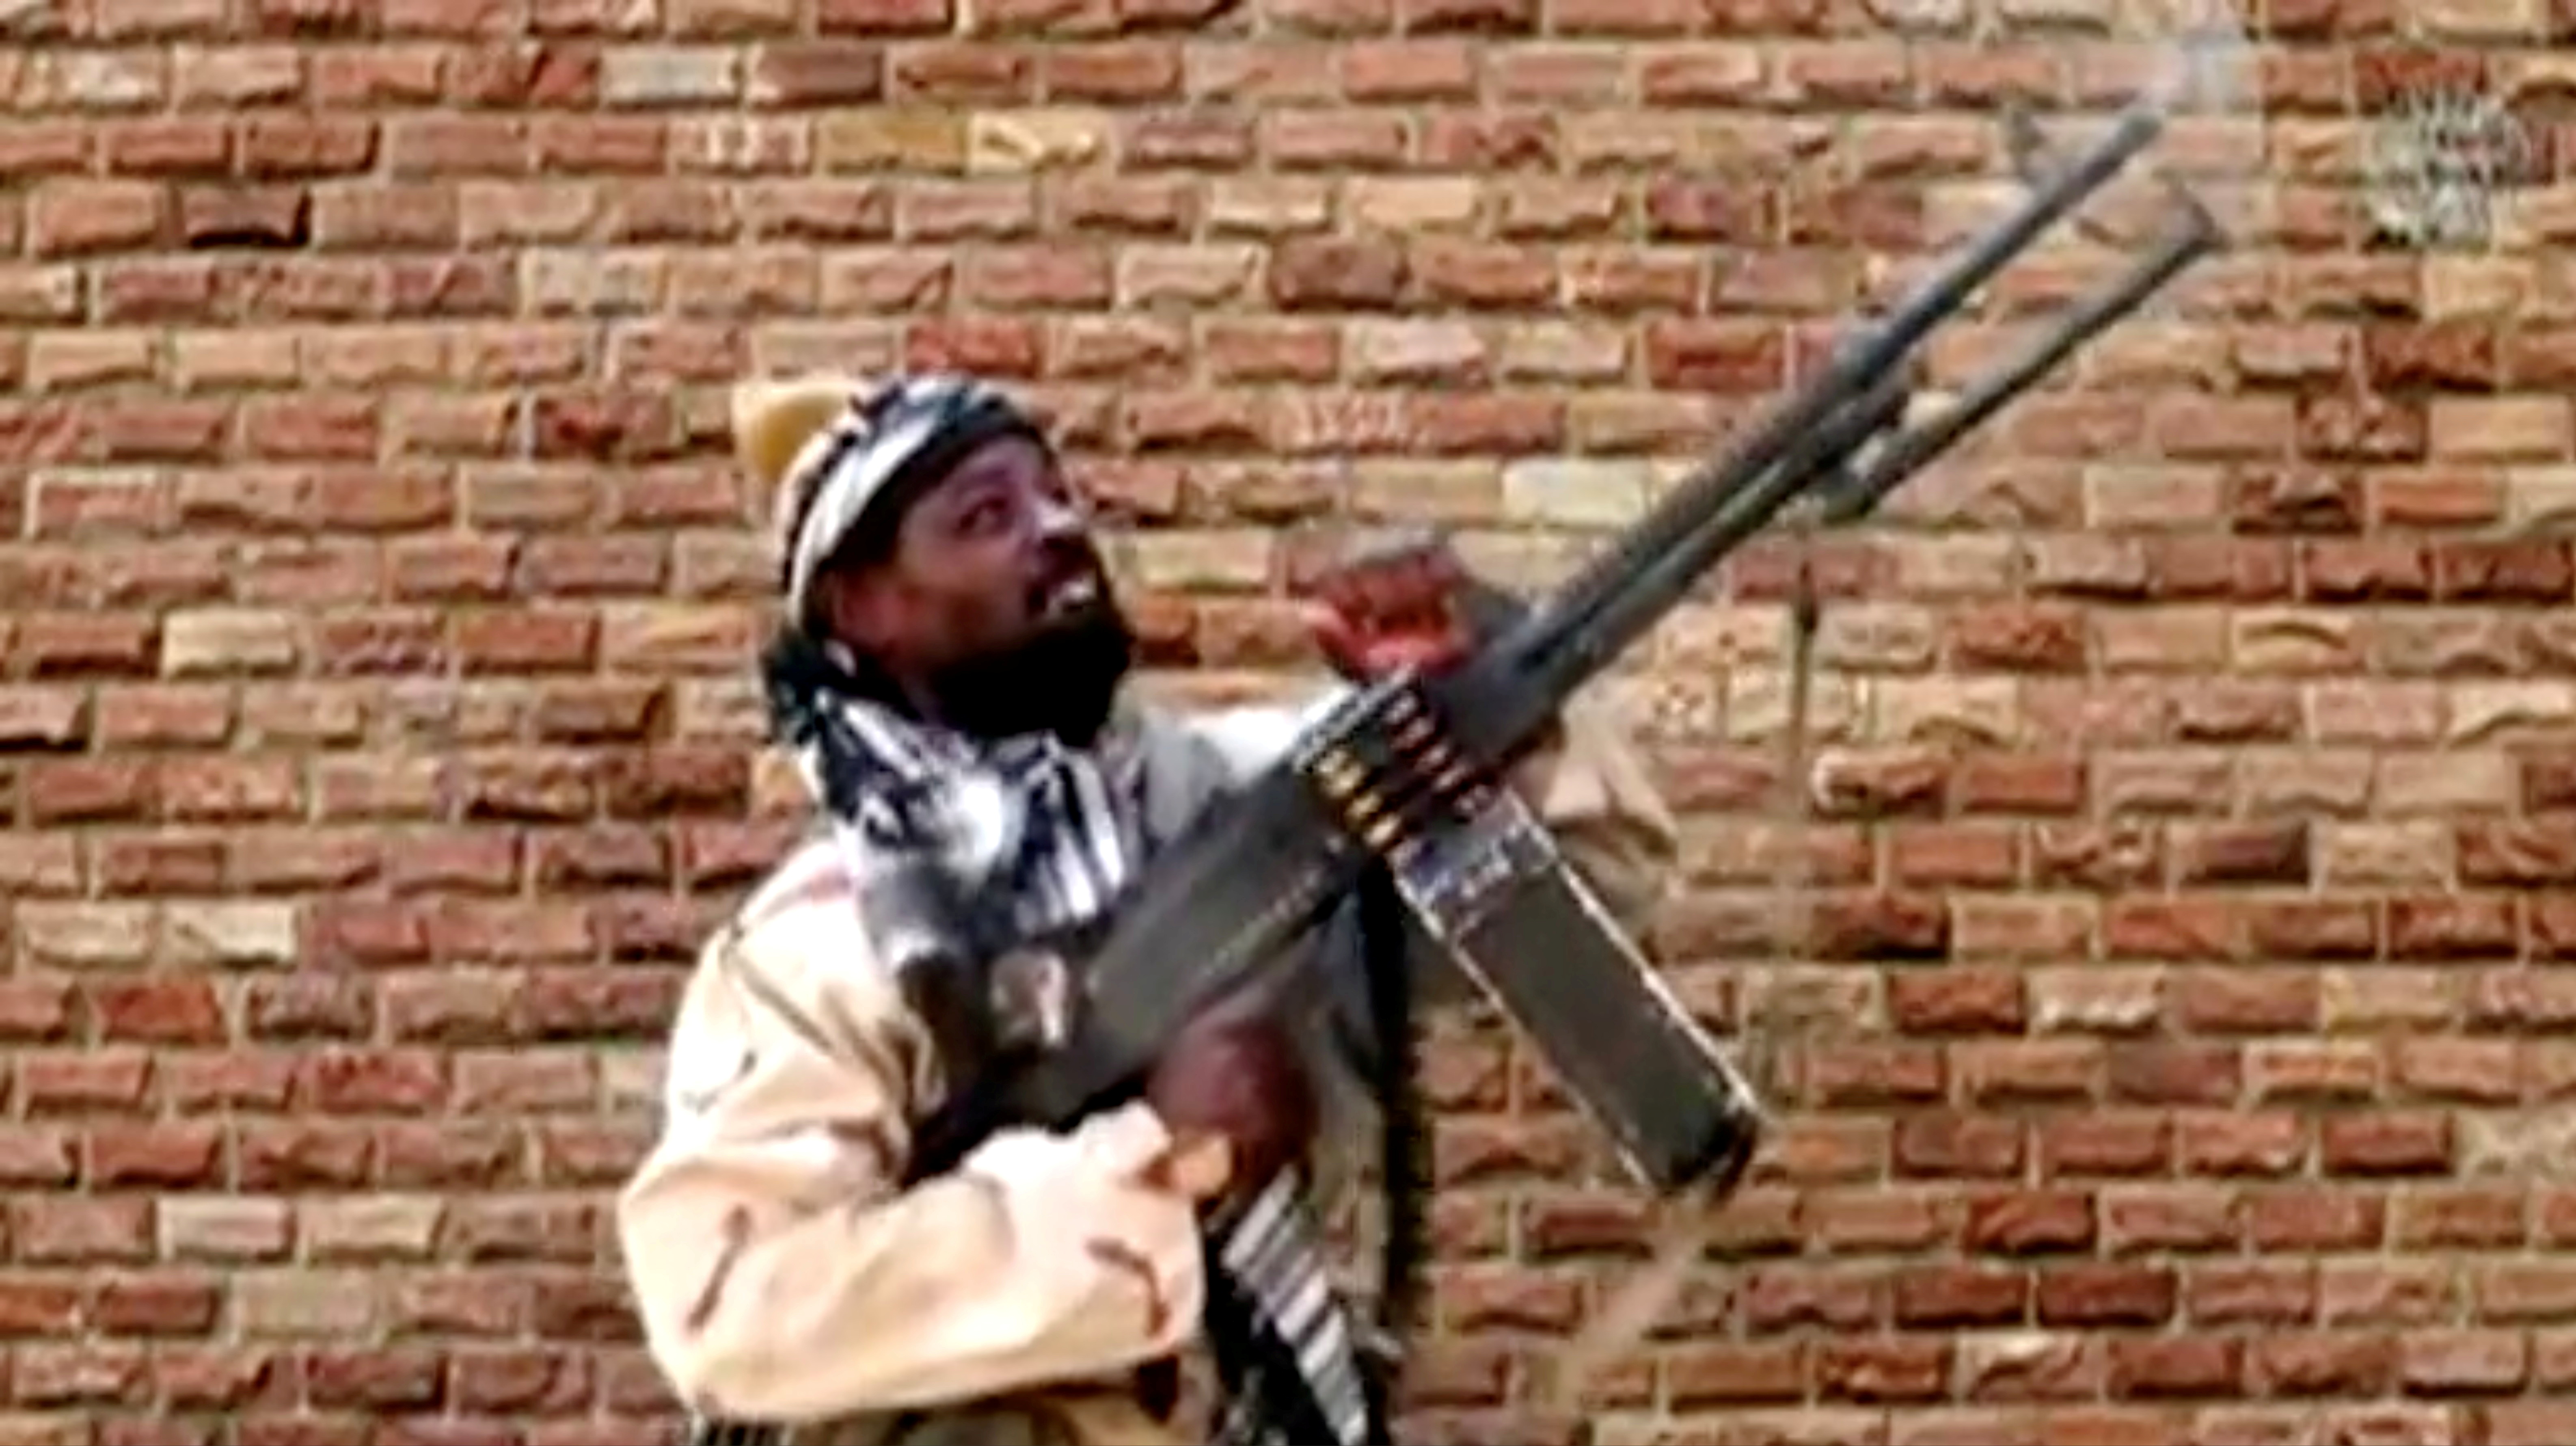 Leader of one of the Boko Haram group's factions, Abubakar Shekau fires from a weapon in an unknown location in Nigeria